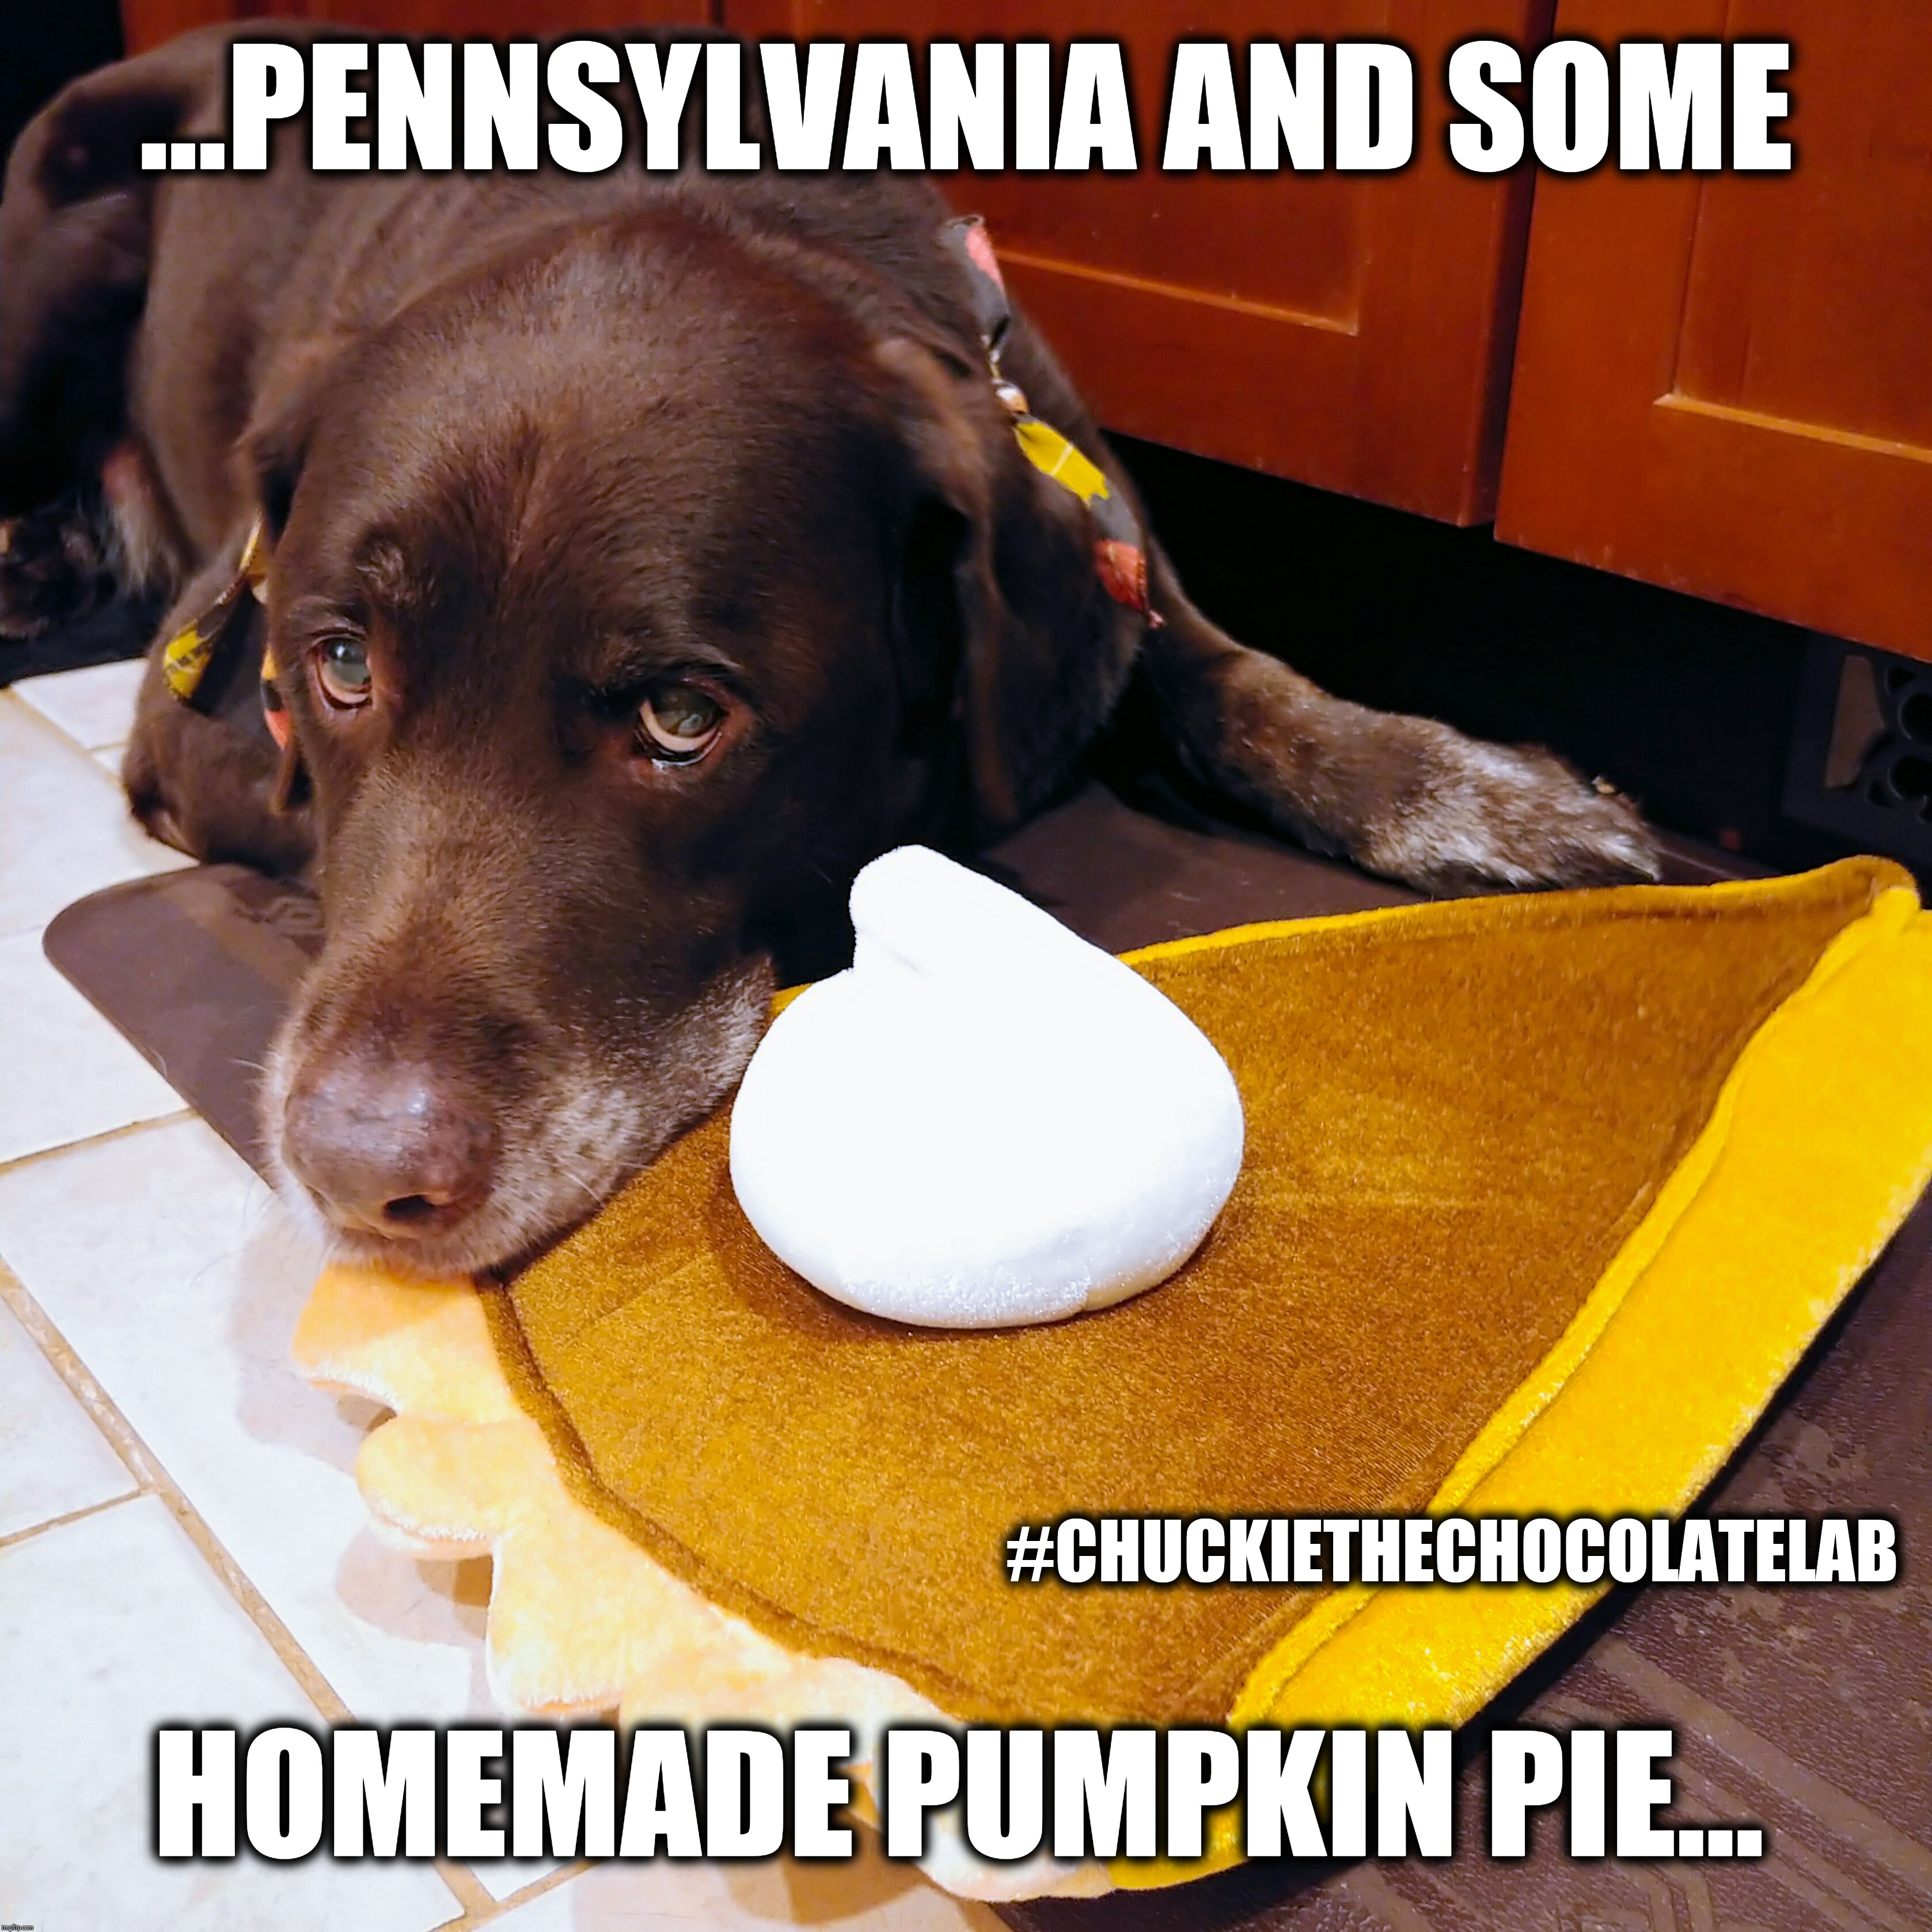 No place like home for the holidays | ...PENNSYLVANIA AND SOME; HOMEMADE PUMPKIN PIE... #CHUCKIETHECHOCOLATELAB | image tagged in chuckie the chocolate lab,dogs,memes,holidays,pumpkin pie,cute | made w/ Imgflip meme maker